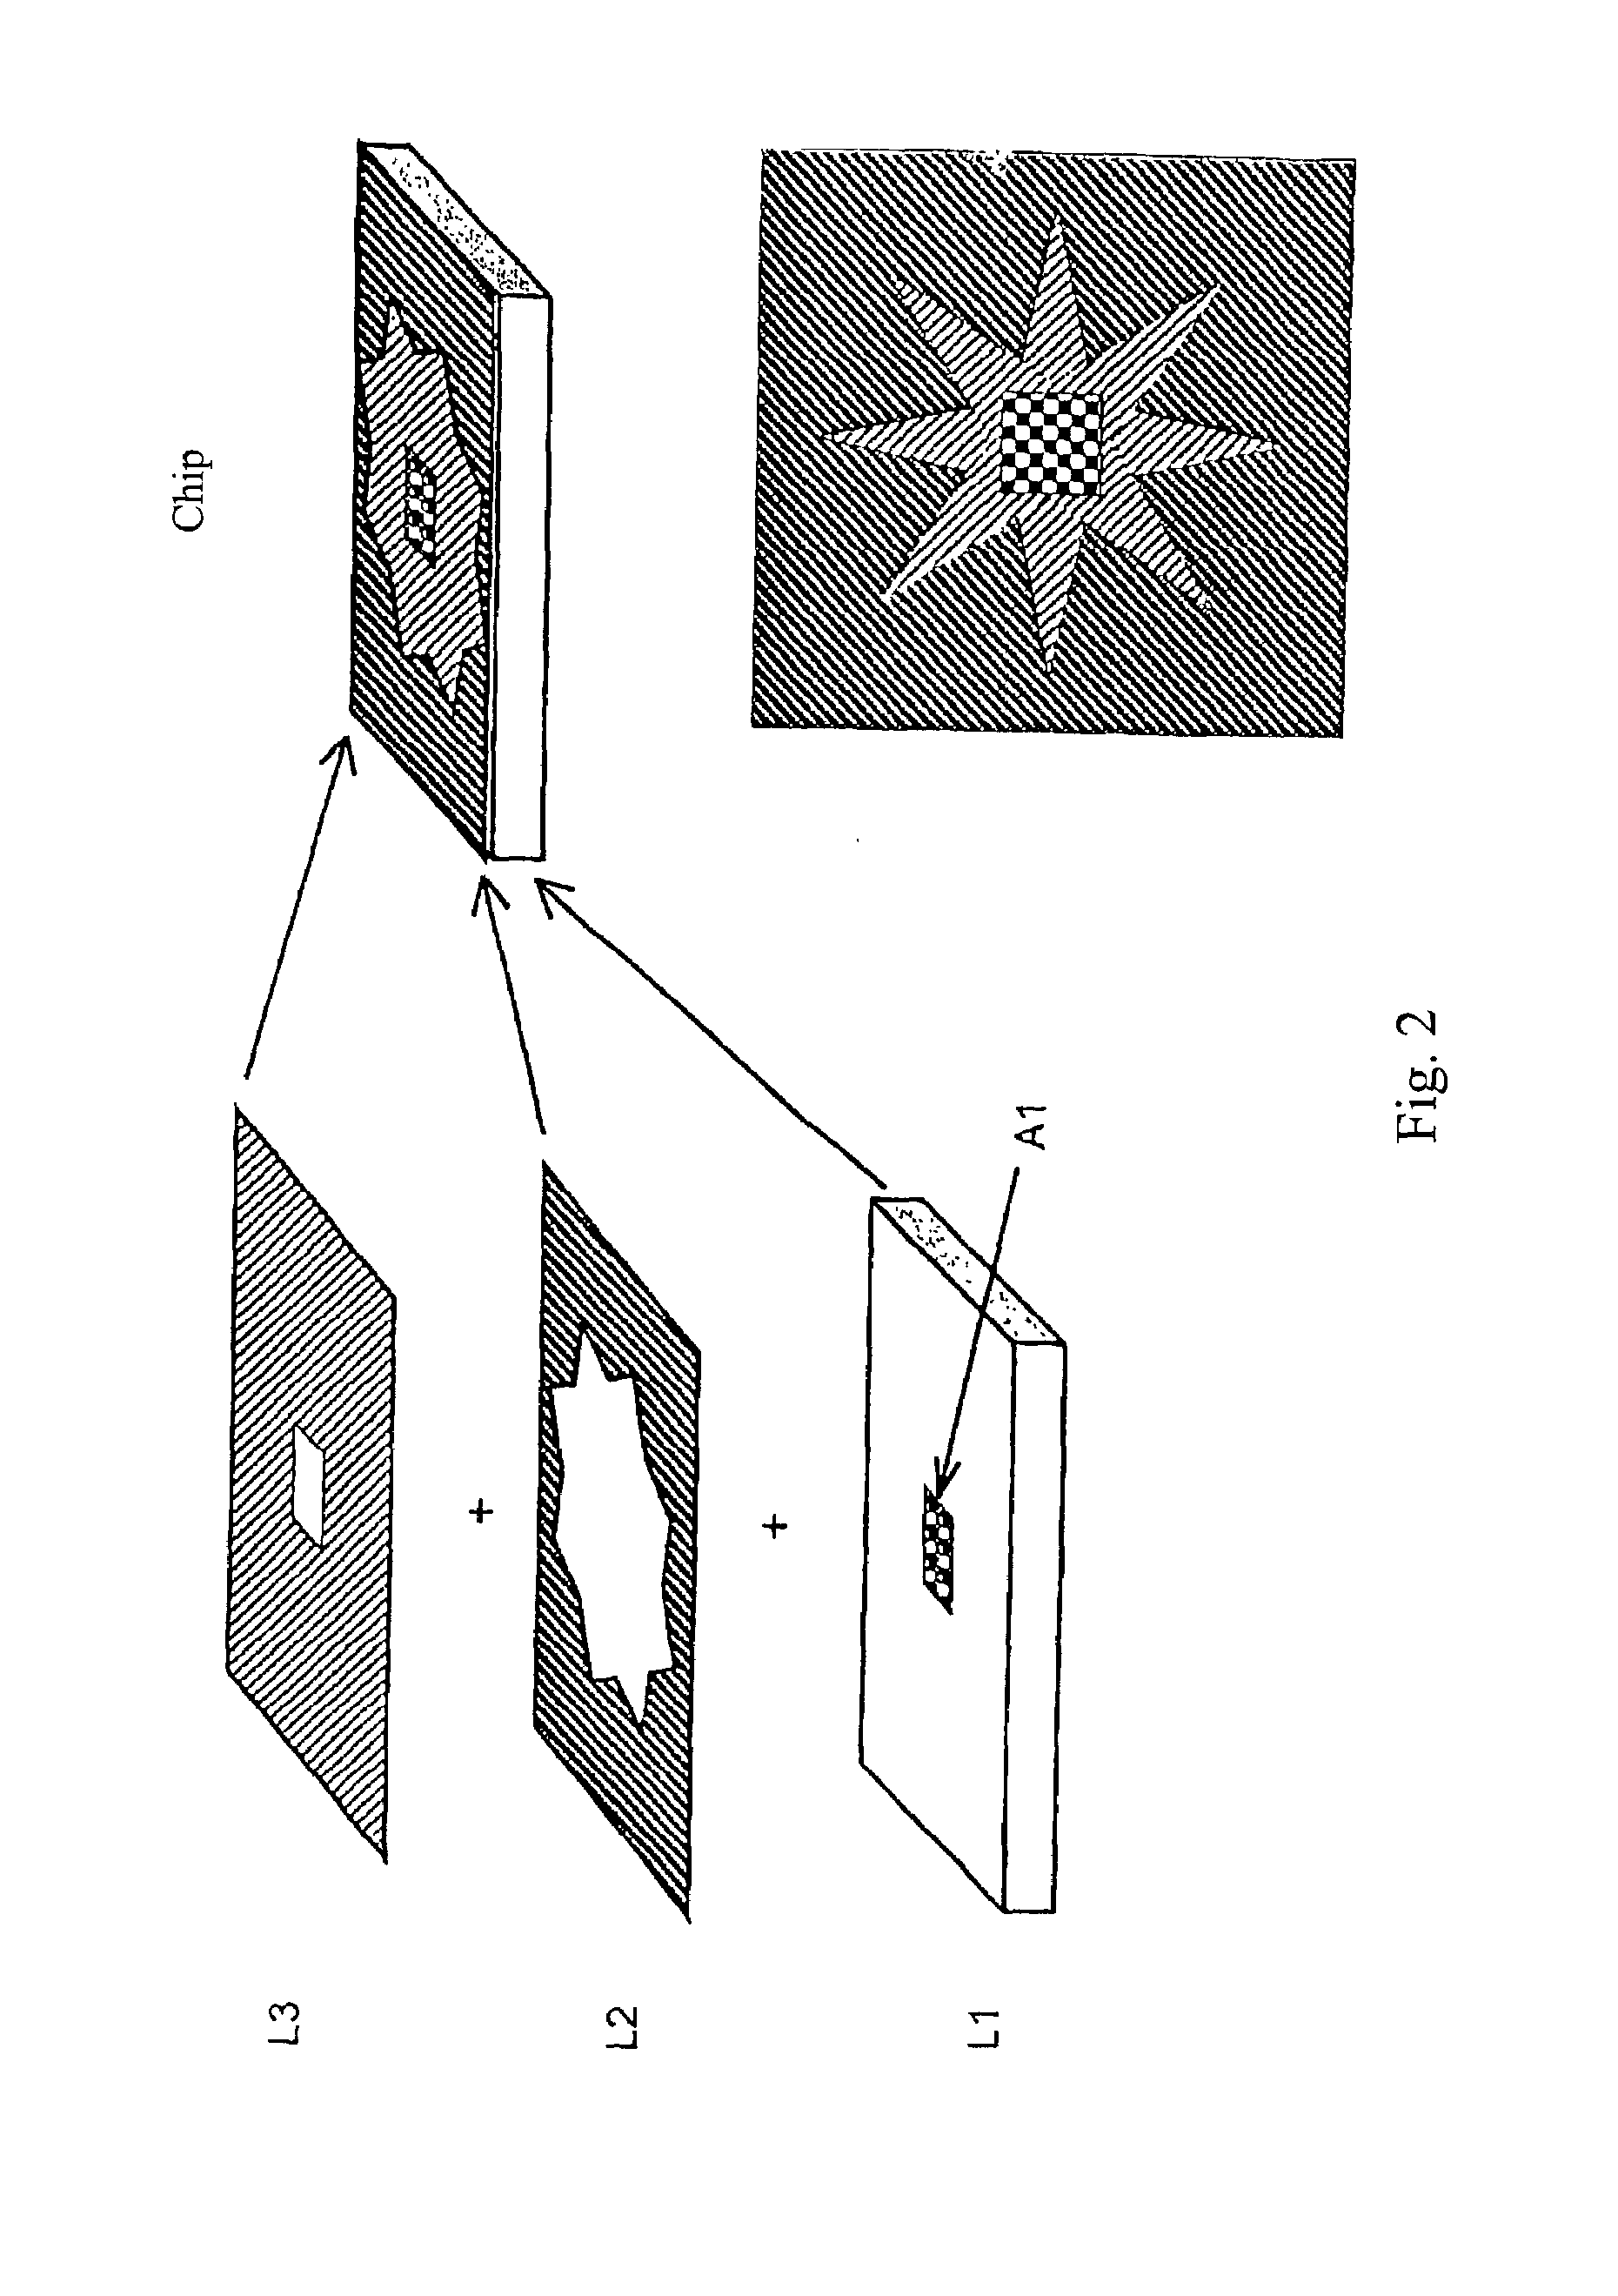 Arrays of microparticles and methods of preparation thereof